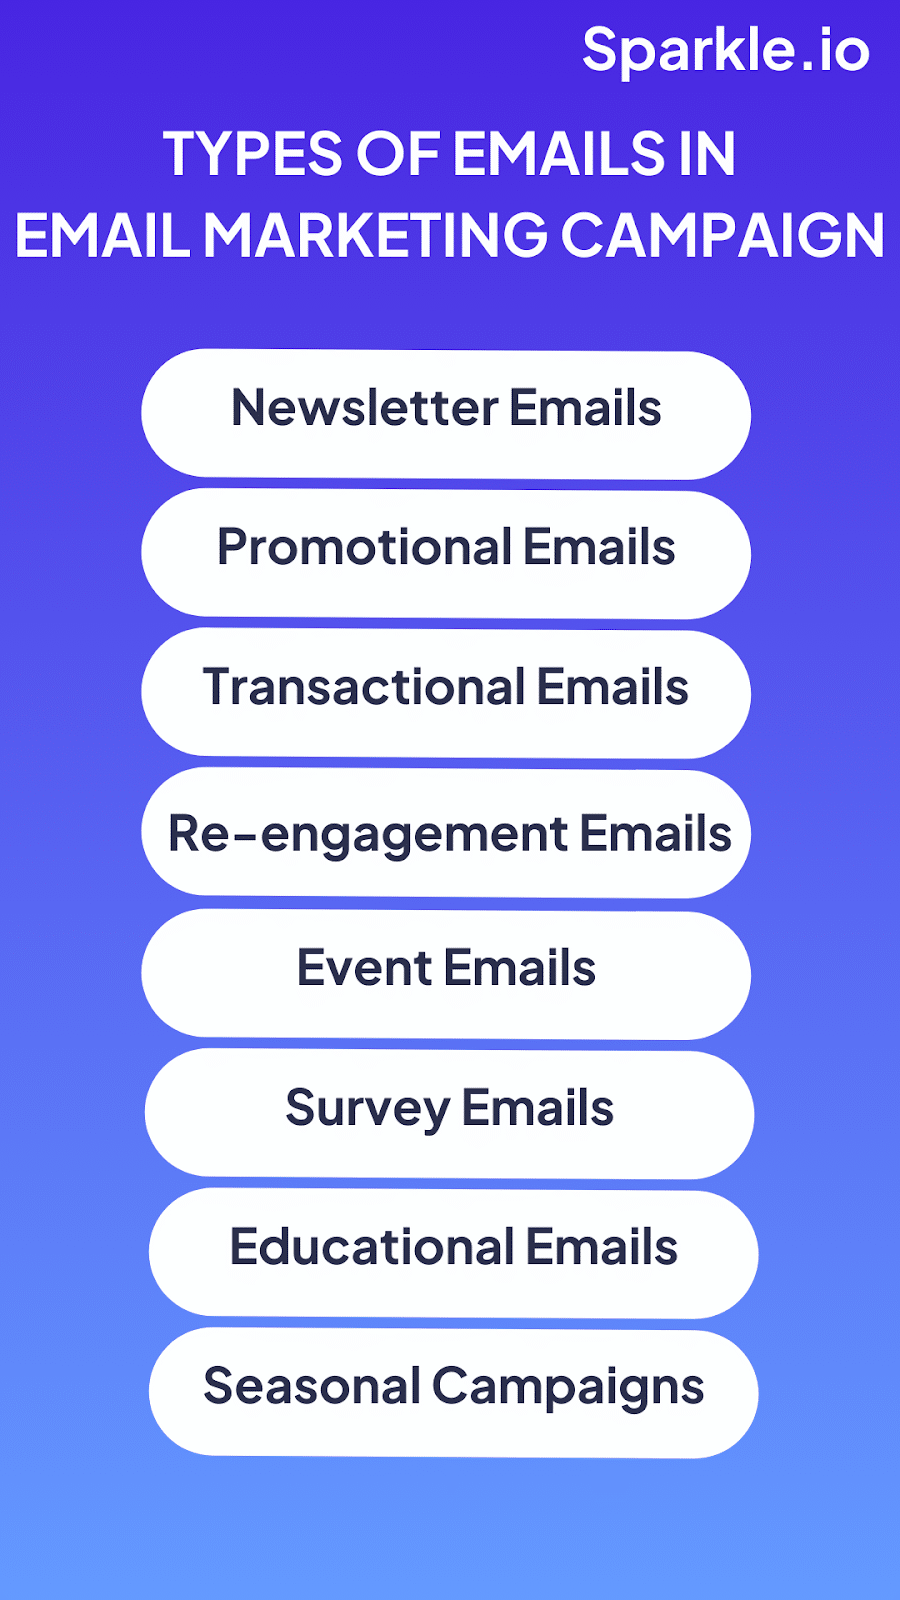 Types of Emails in Email Marketing Campaign